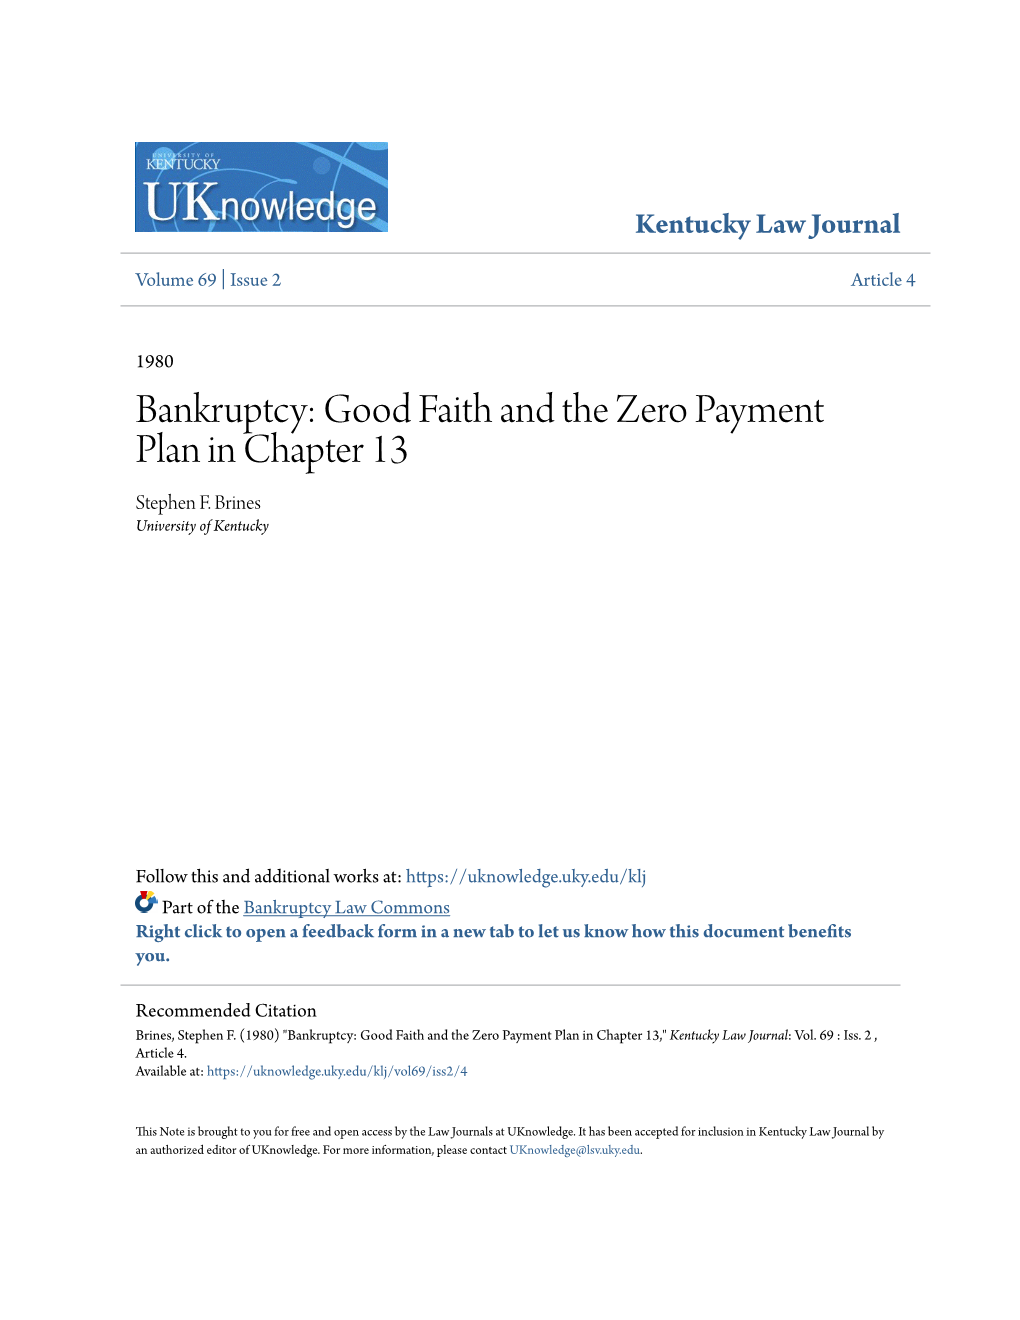 Bankruptcy: Good Faith and the Zero Payment Plan in Chapter 13 Stephen F